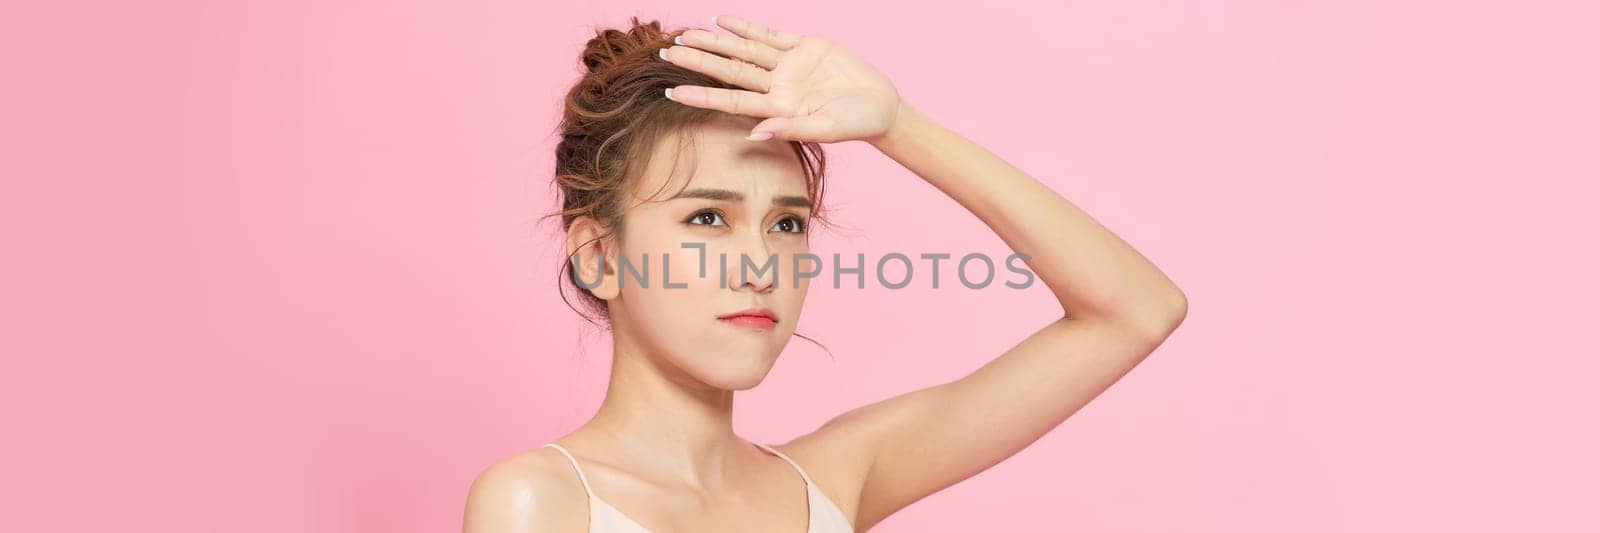 Woman covering her face from sun with her hand while standing against pink background by makidotvn